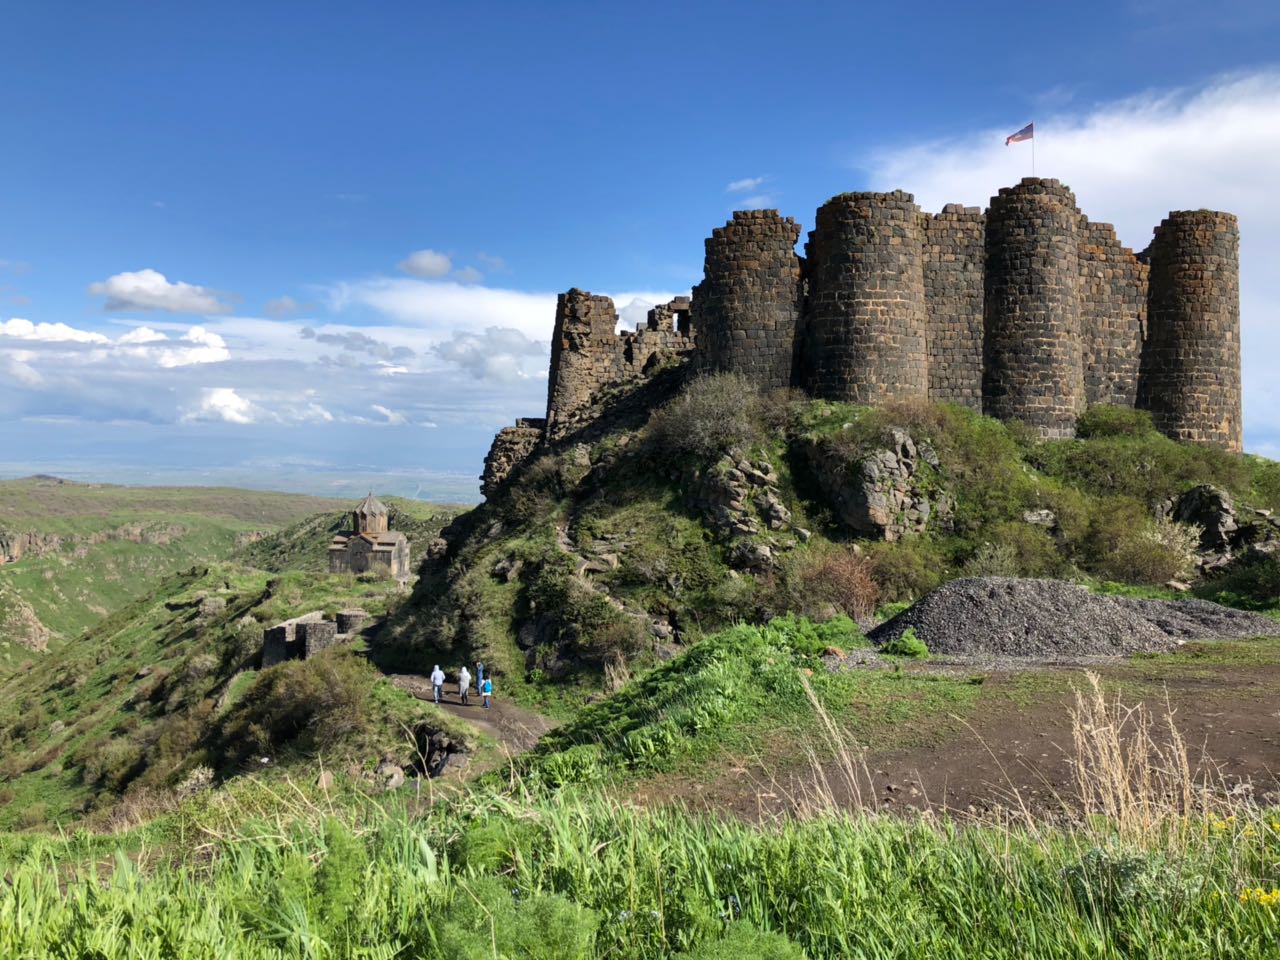 Built on top of a hill, the Amberd Castle was a summer home for kings